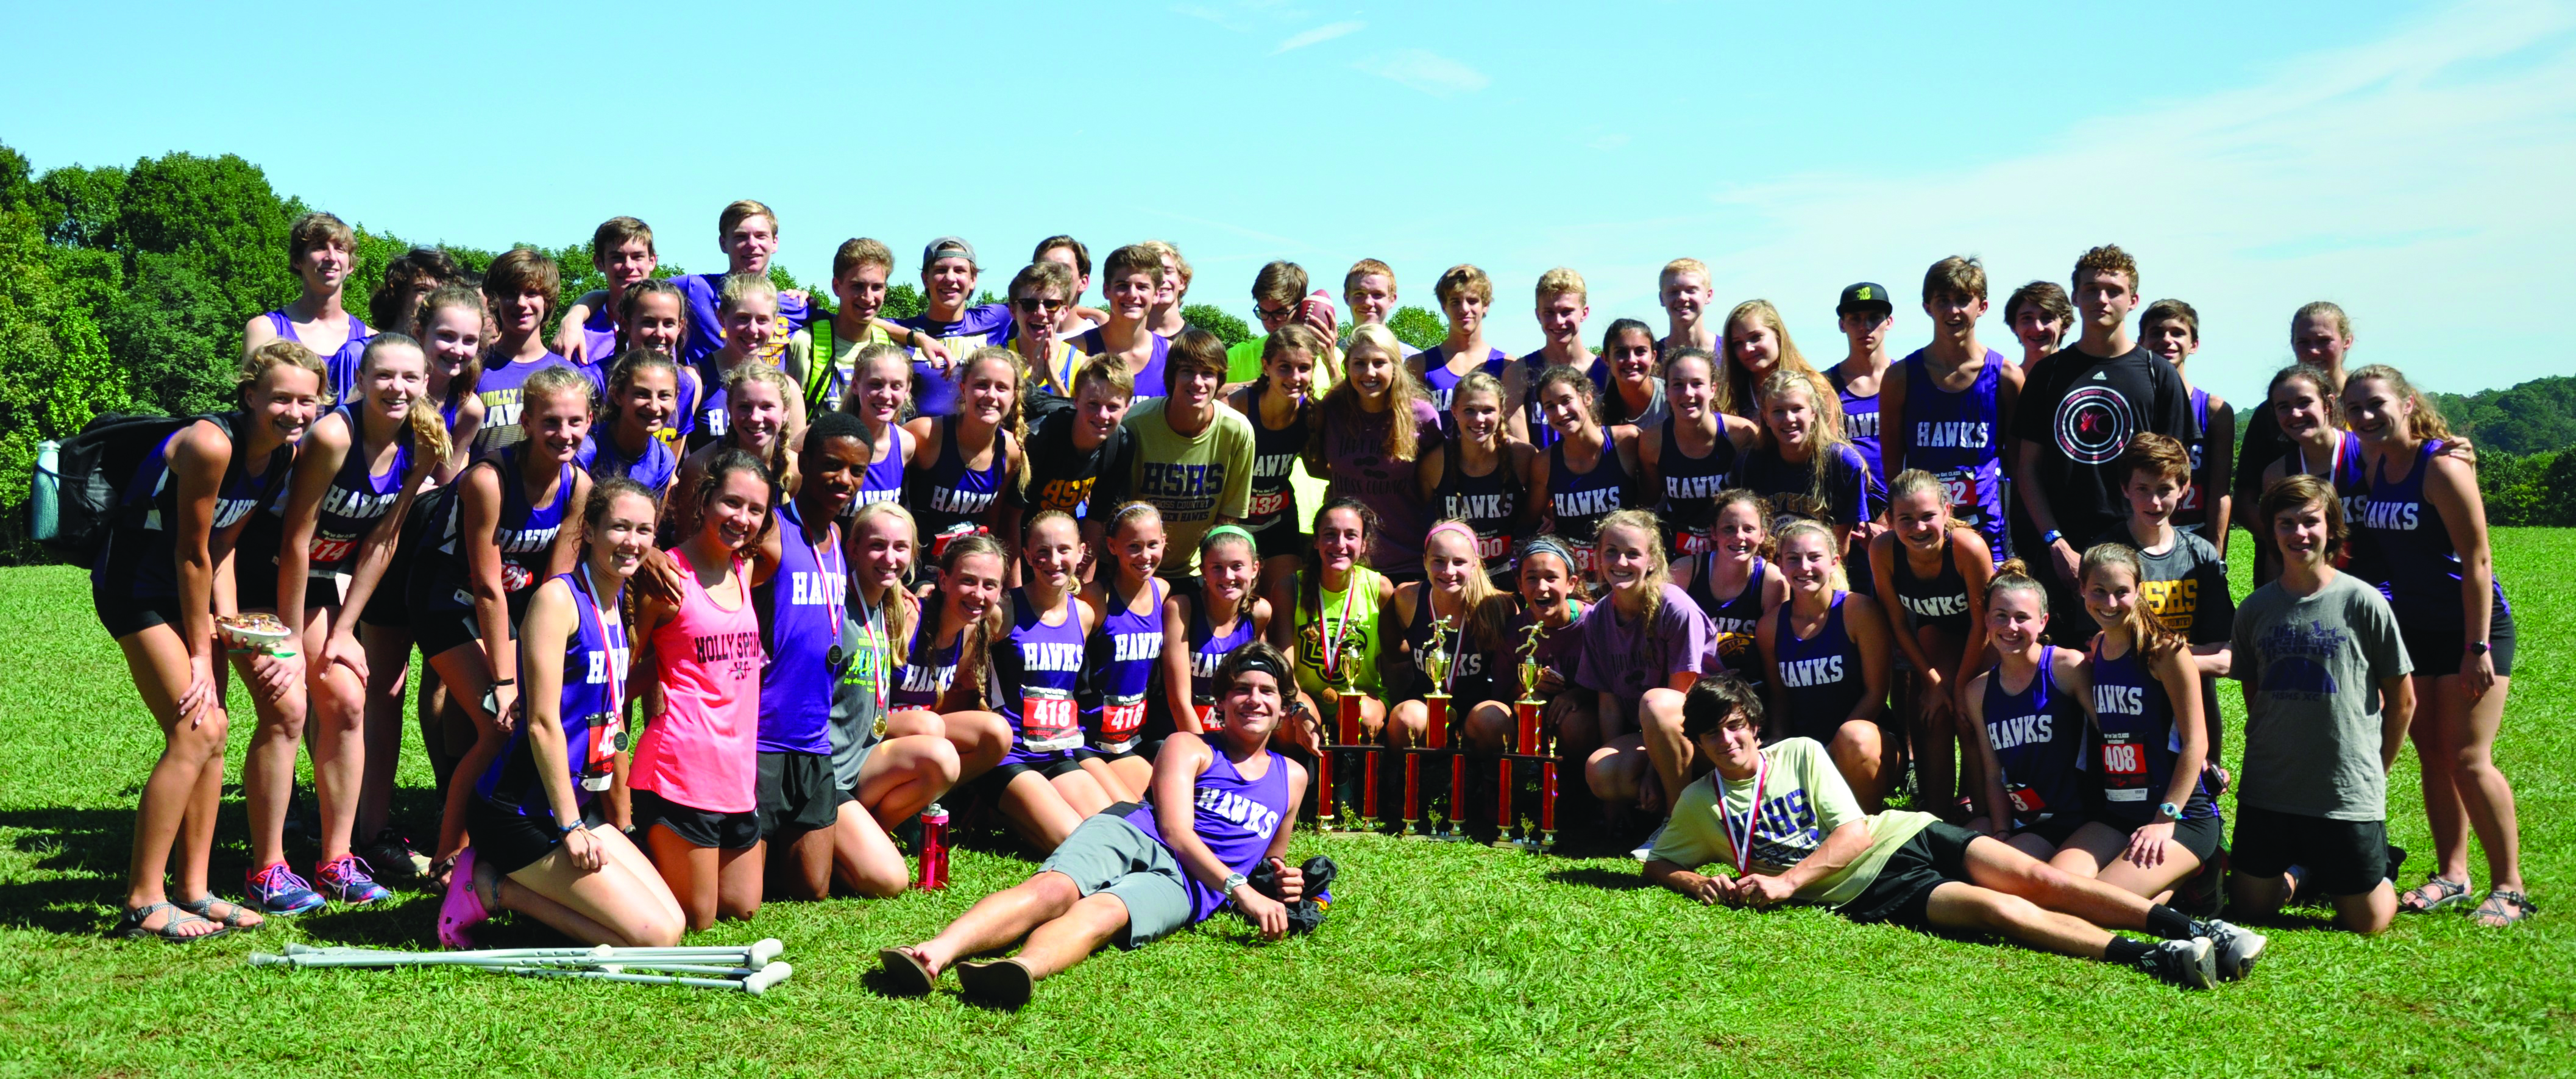 Racing to the Top  Holly Springs High School Cross Country Team    By Stacy Kivett